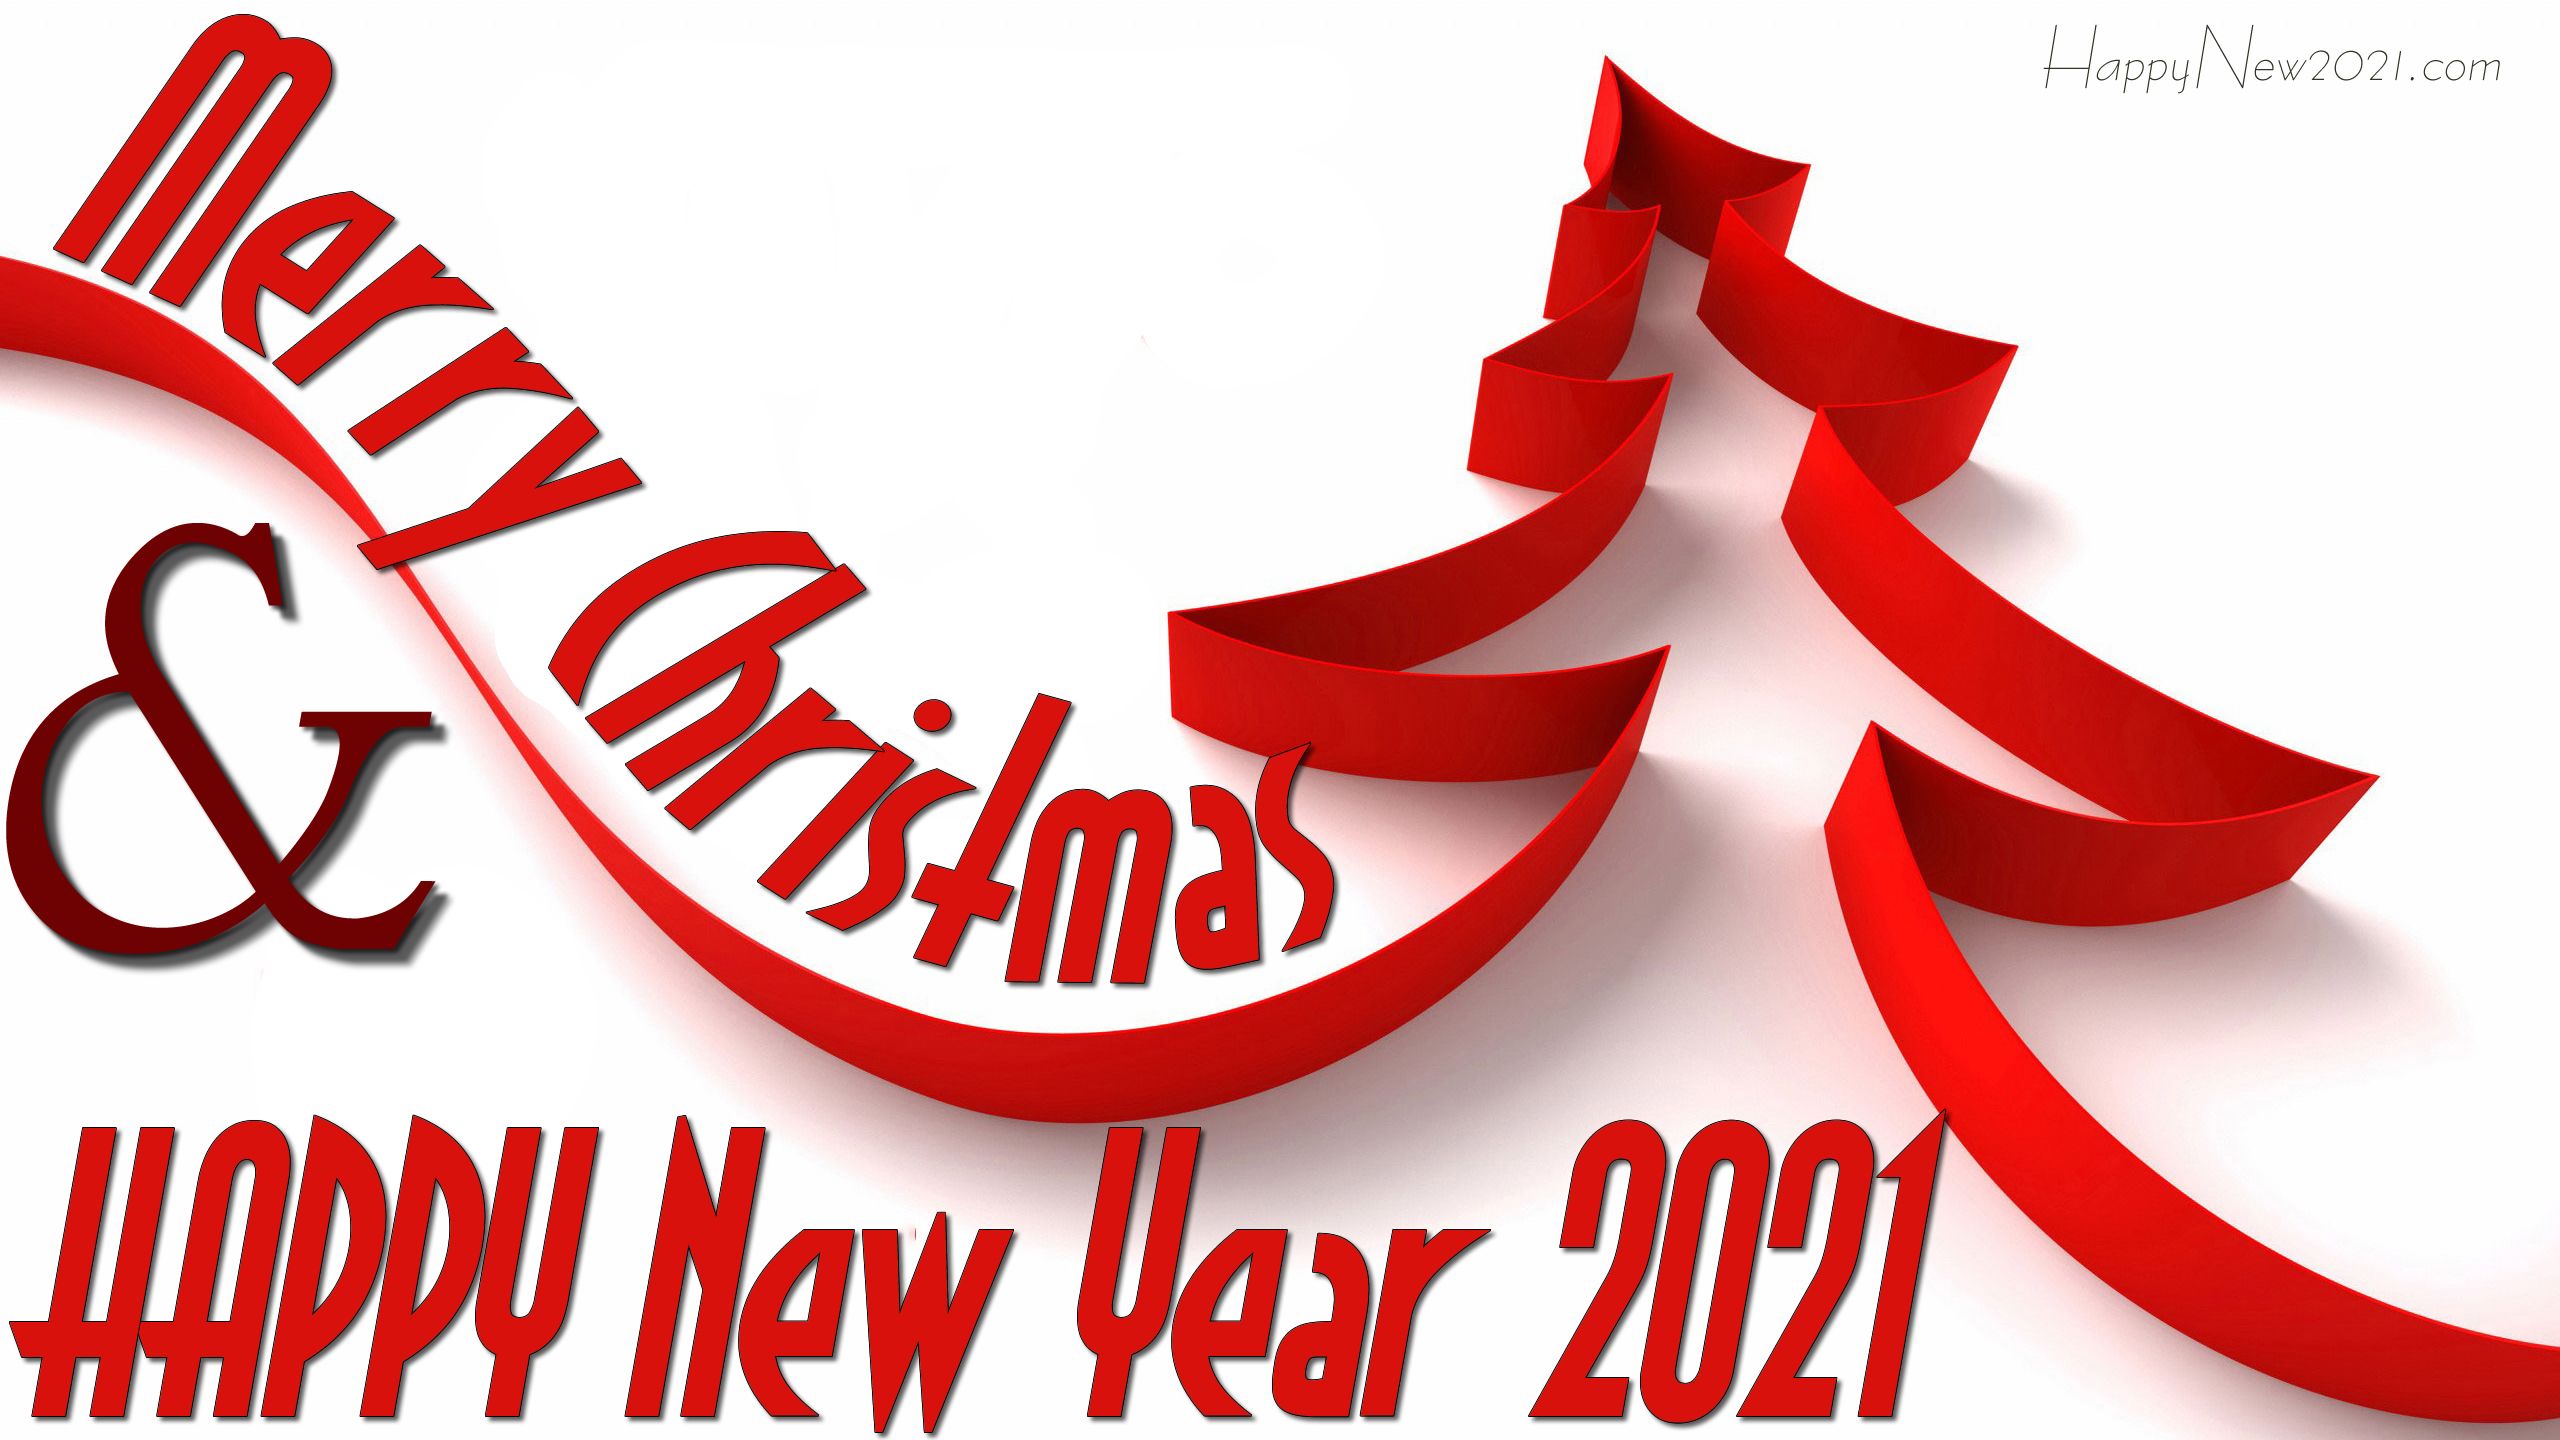 Merry Christmas And Happy New Year 2021 image